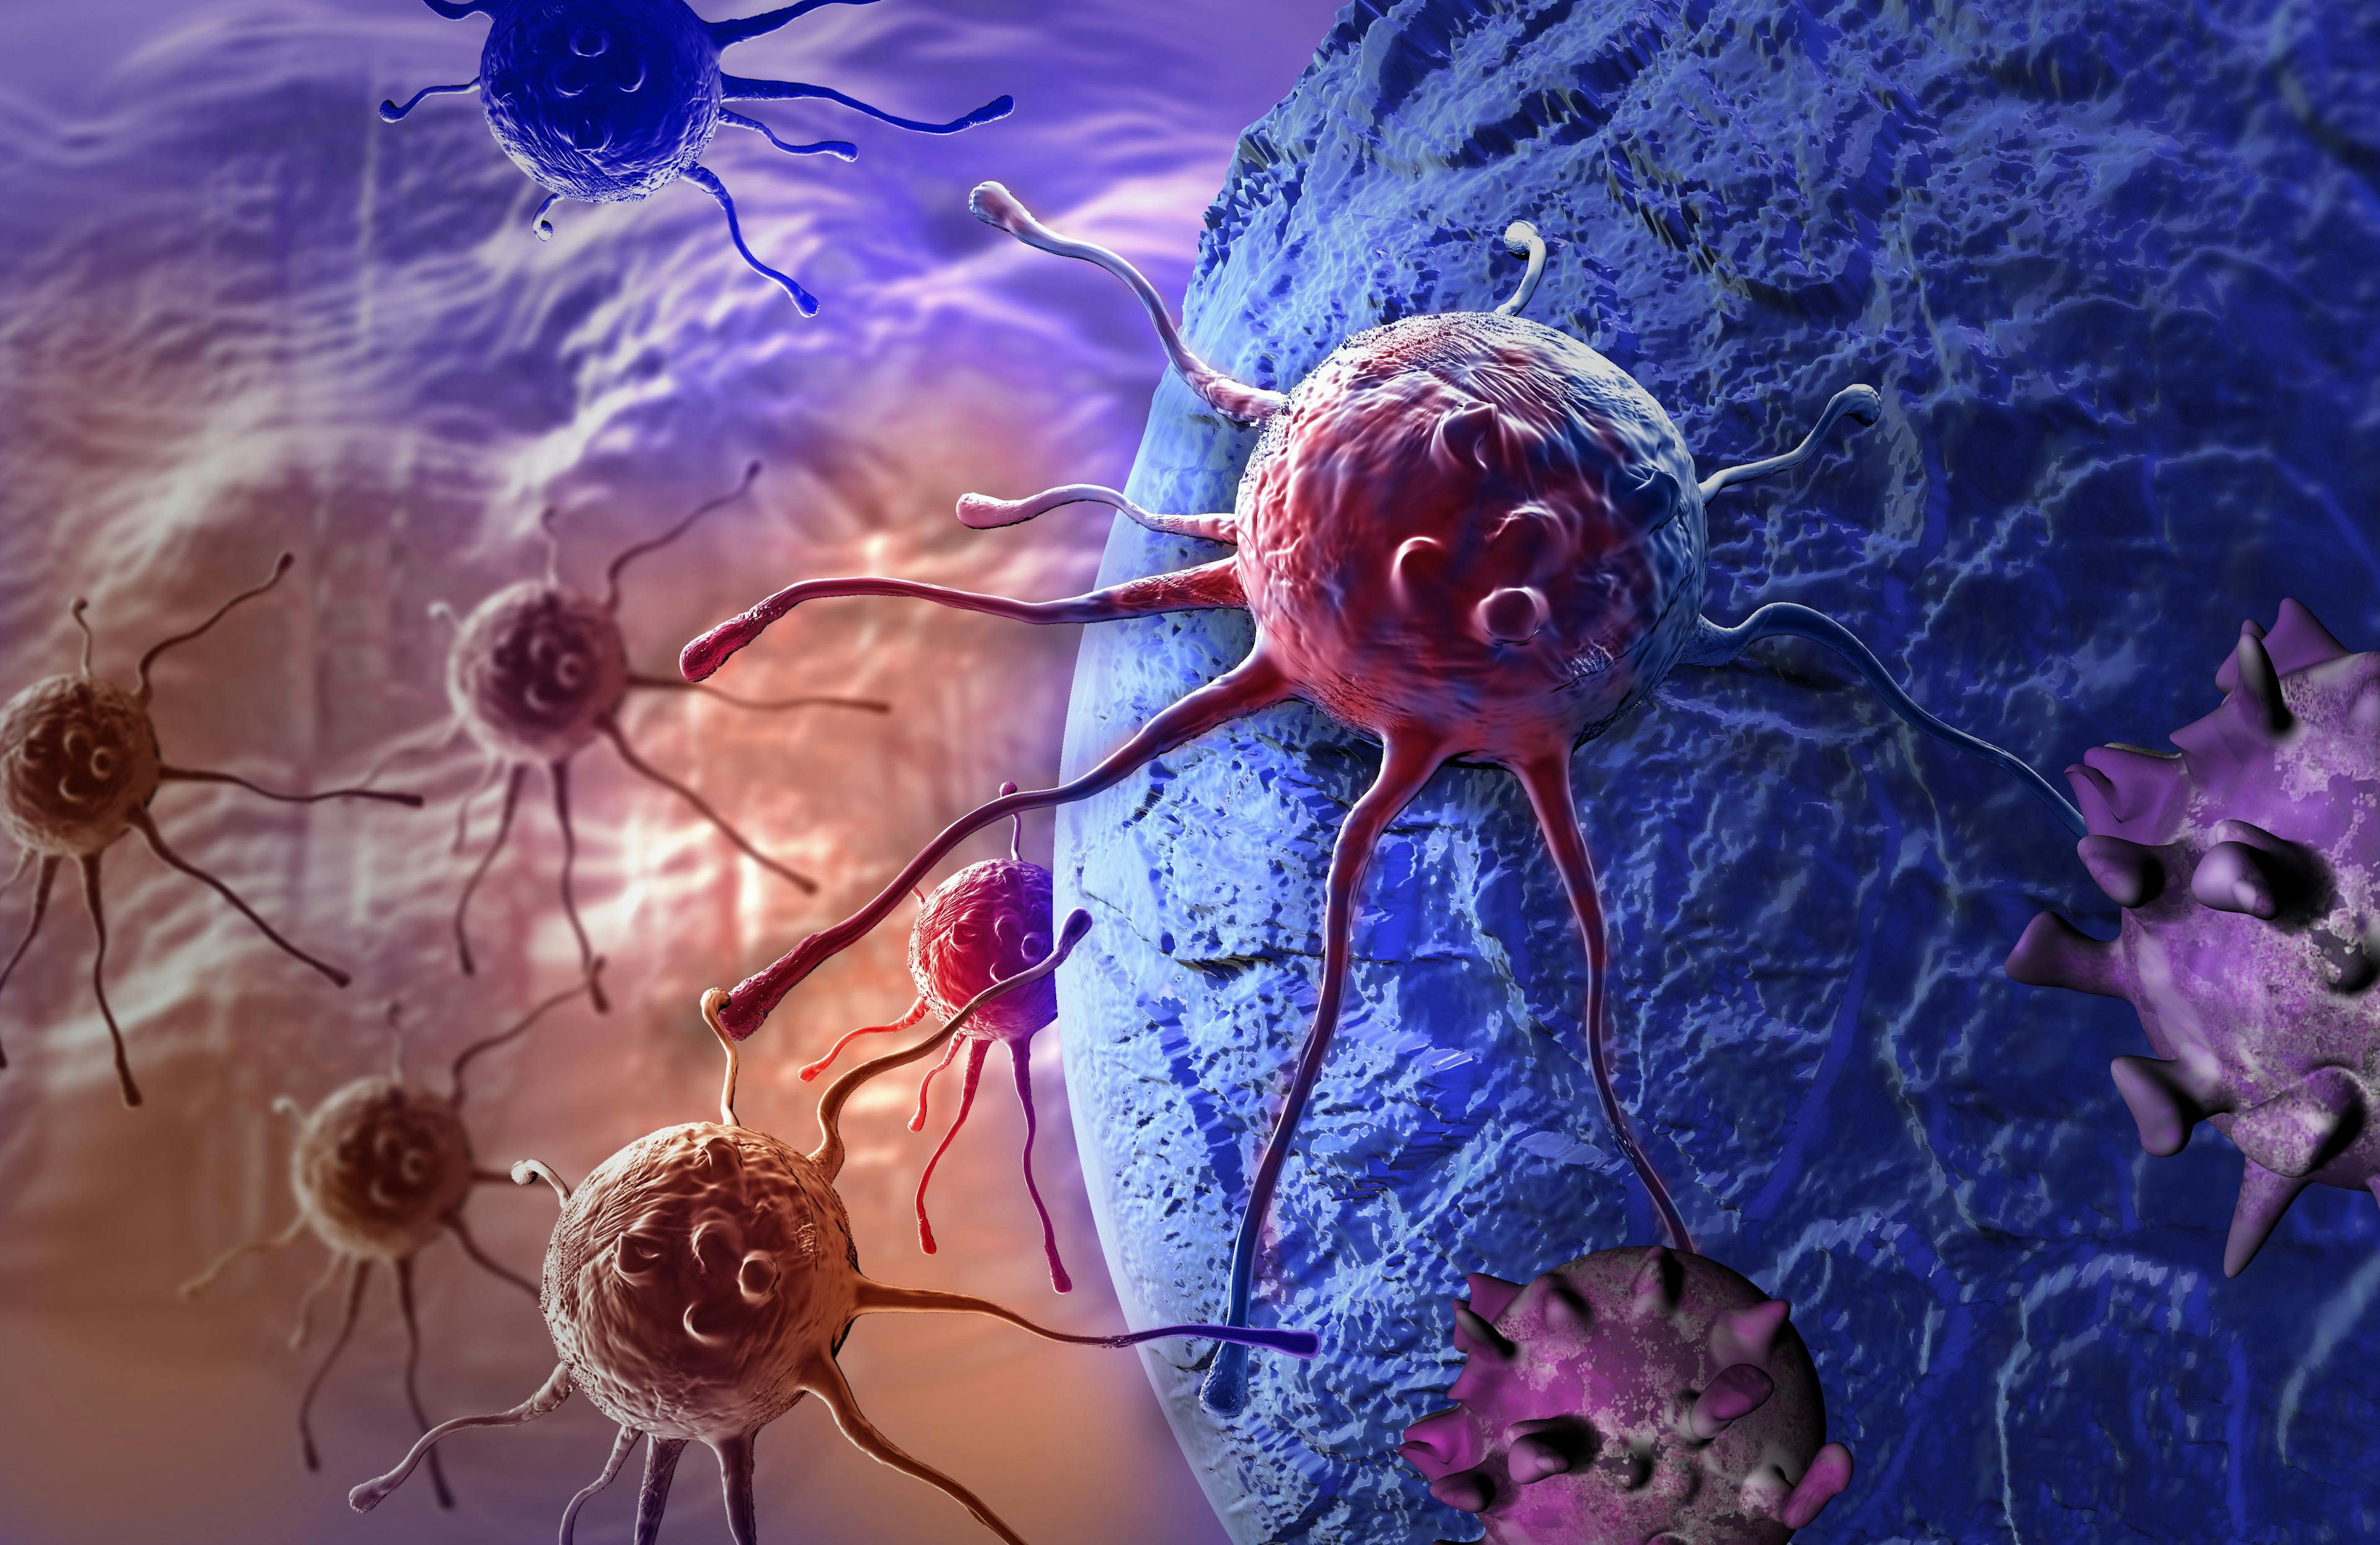 Novel Chemo/NK Cell Therapy Combination Shows Efficacy in Pancreatic Cancer